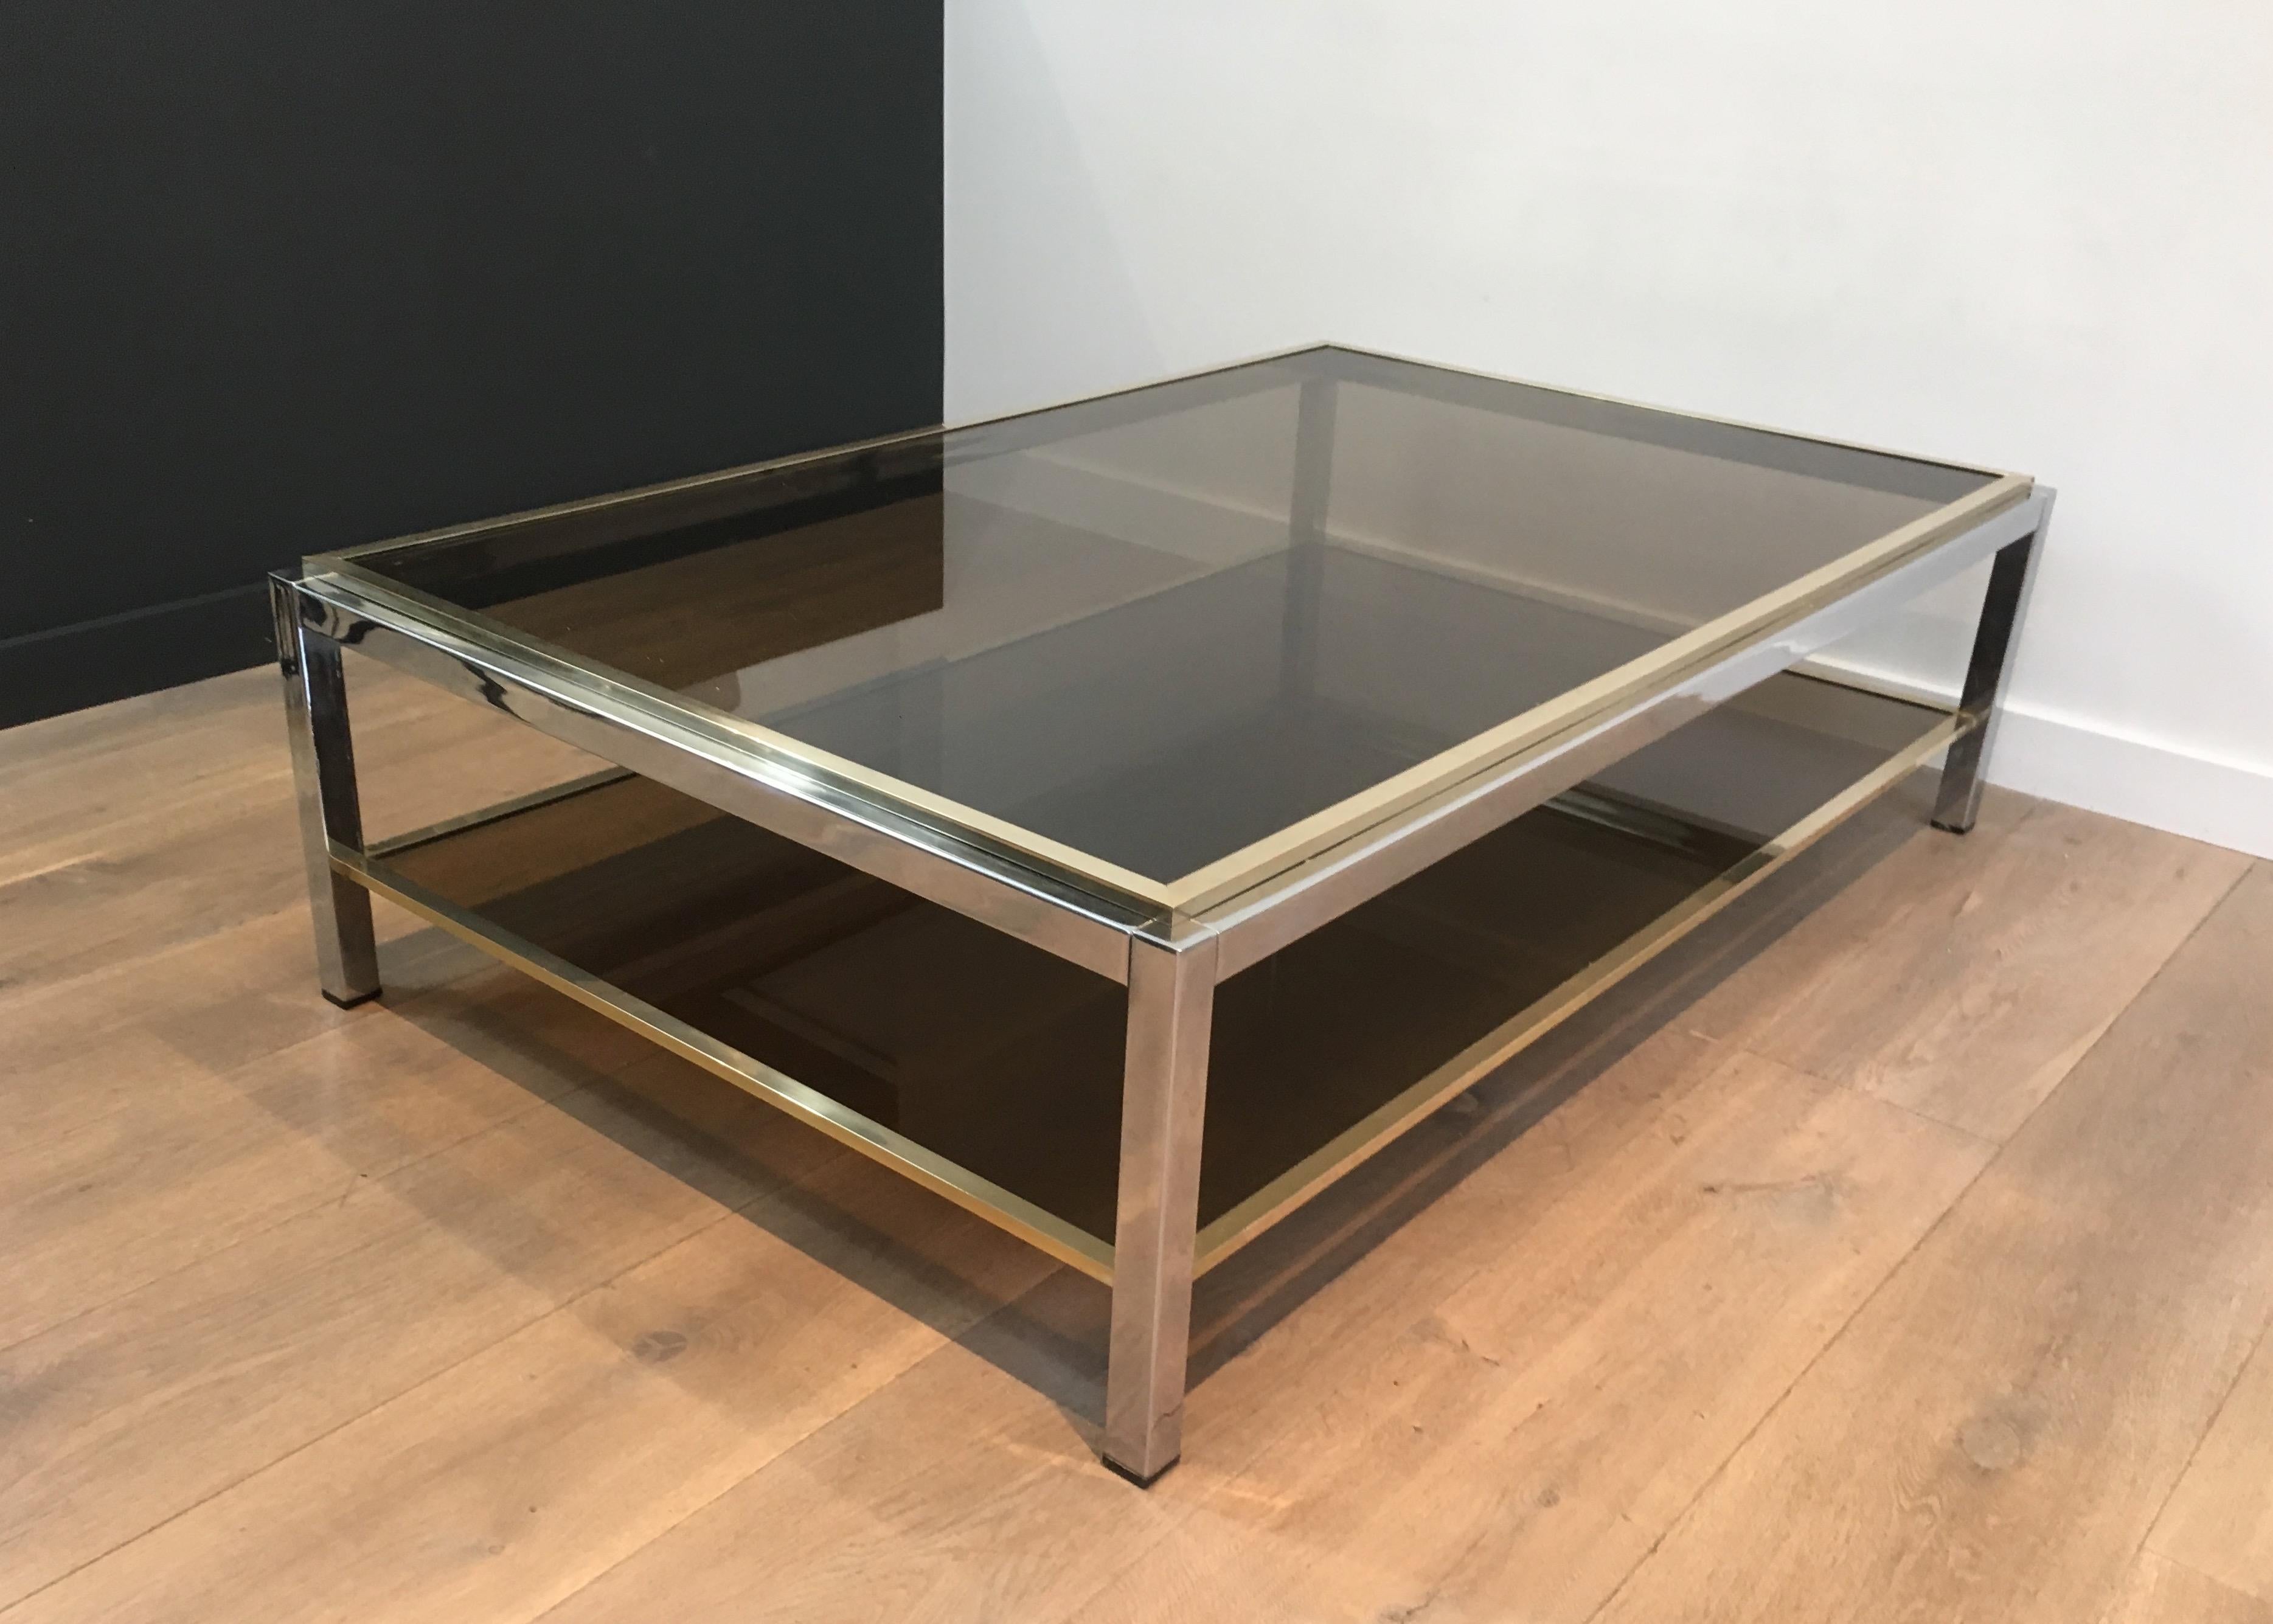 Bronzed Attributed to Willy Rizzo, Large Chrome and Brass Coffee Table with Smoked Glass